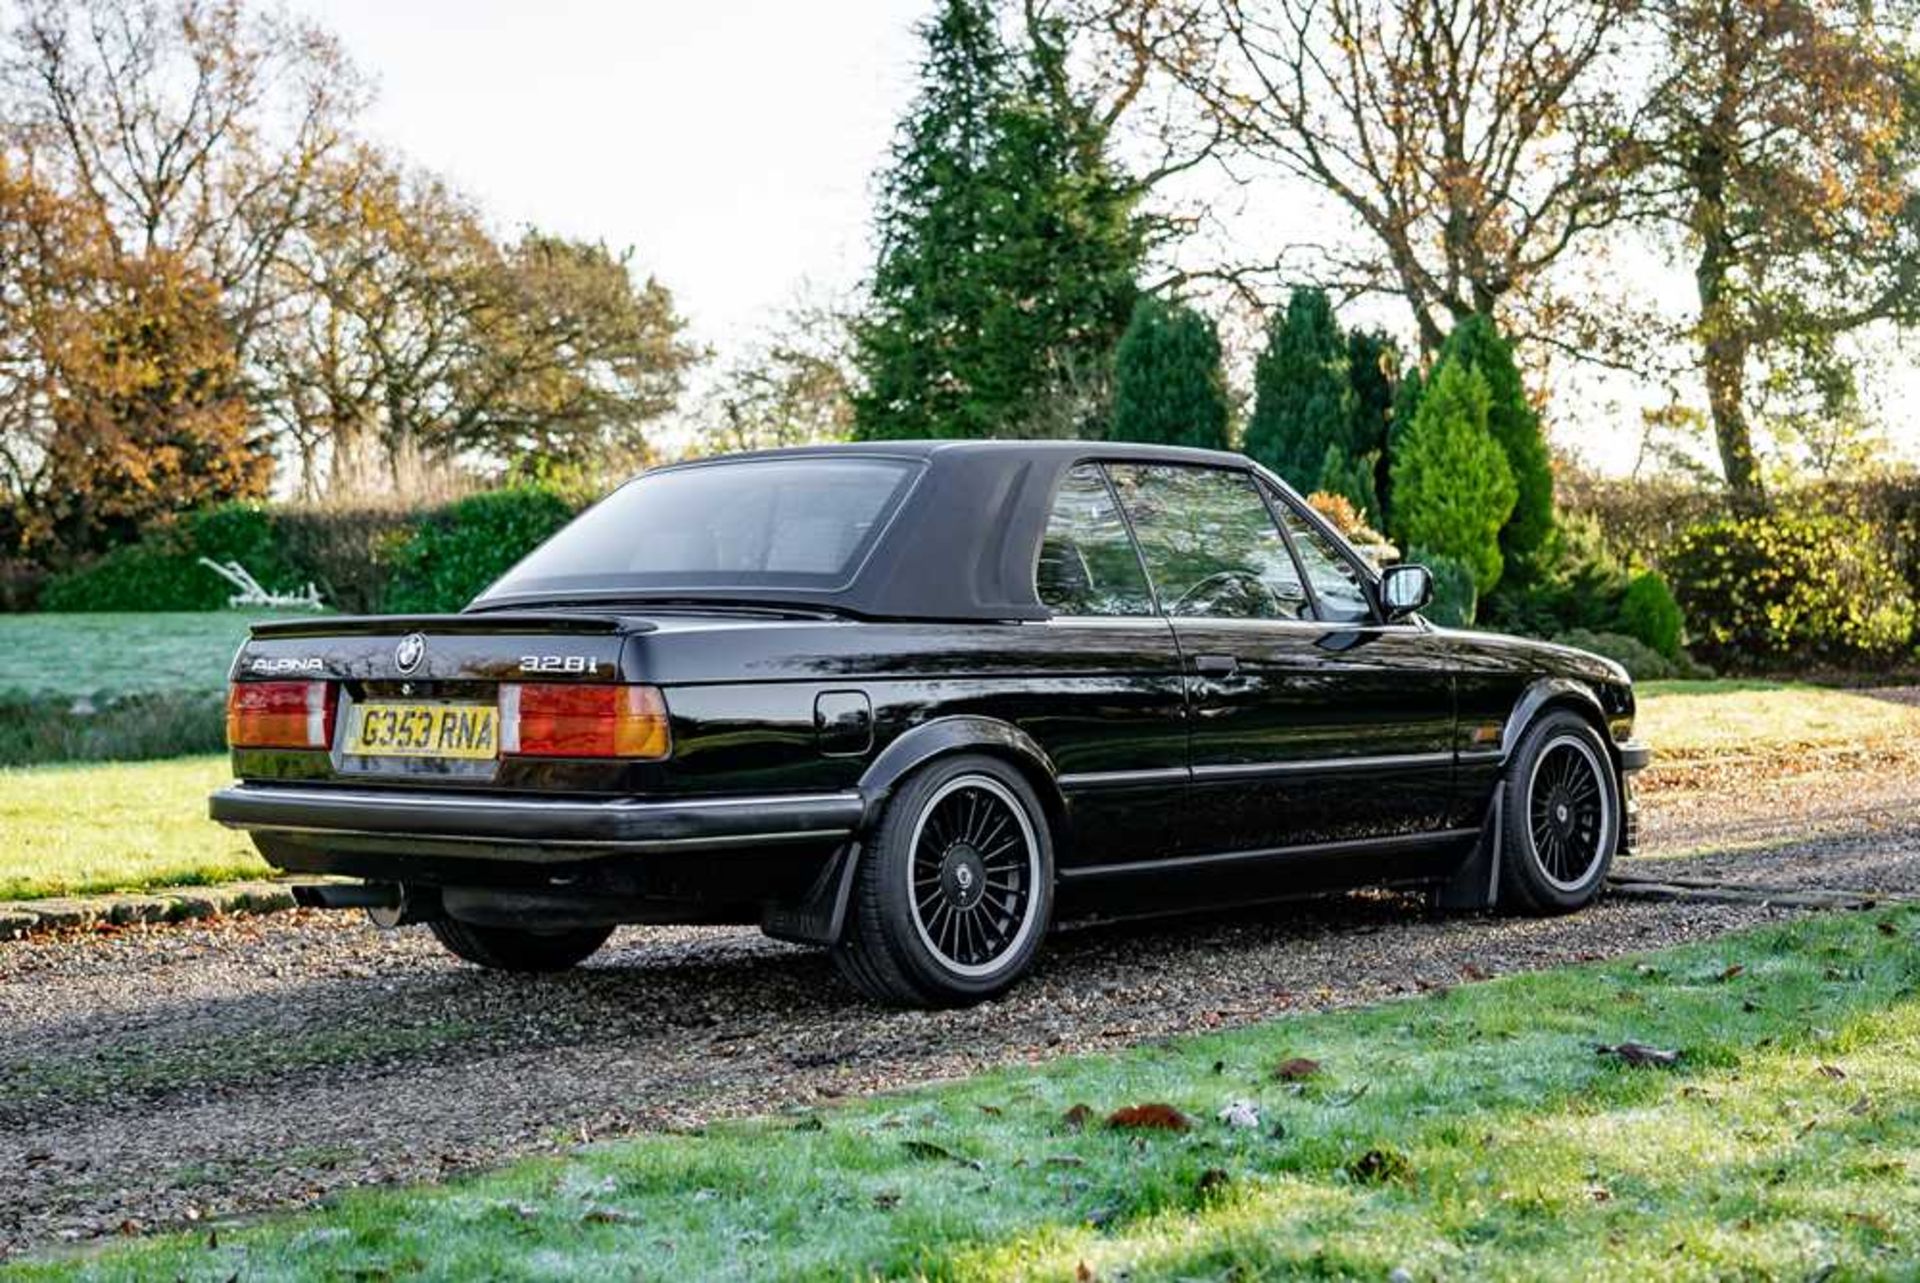 1989 BMW 320i Convertible Converted to Alpina 328i Specification - Image 13 of 51